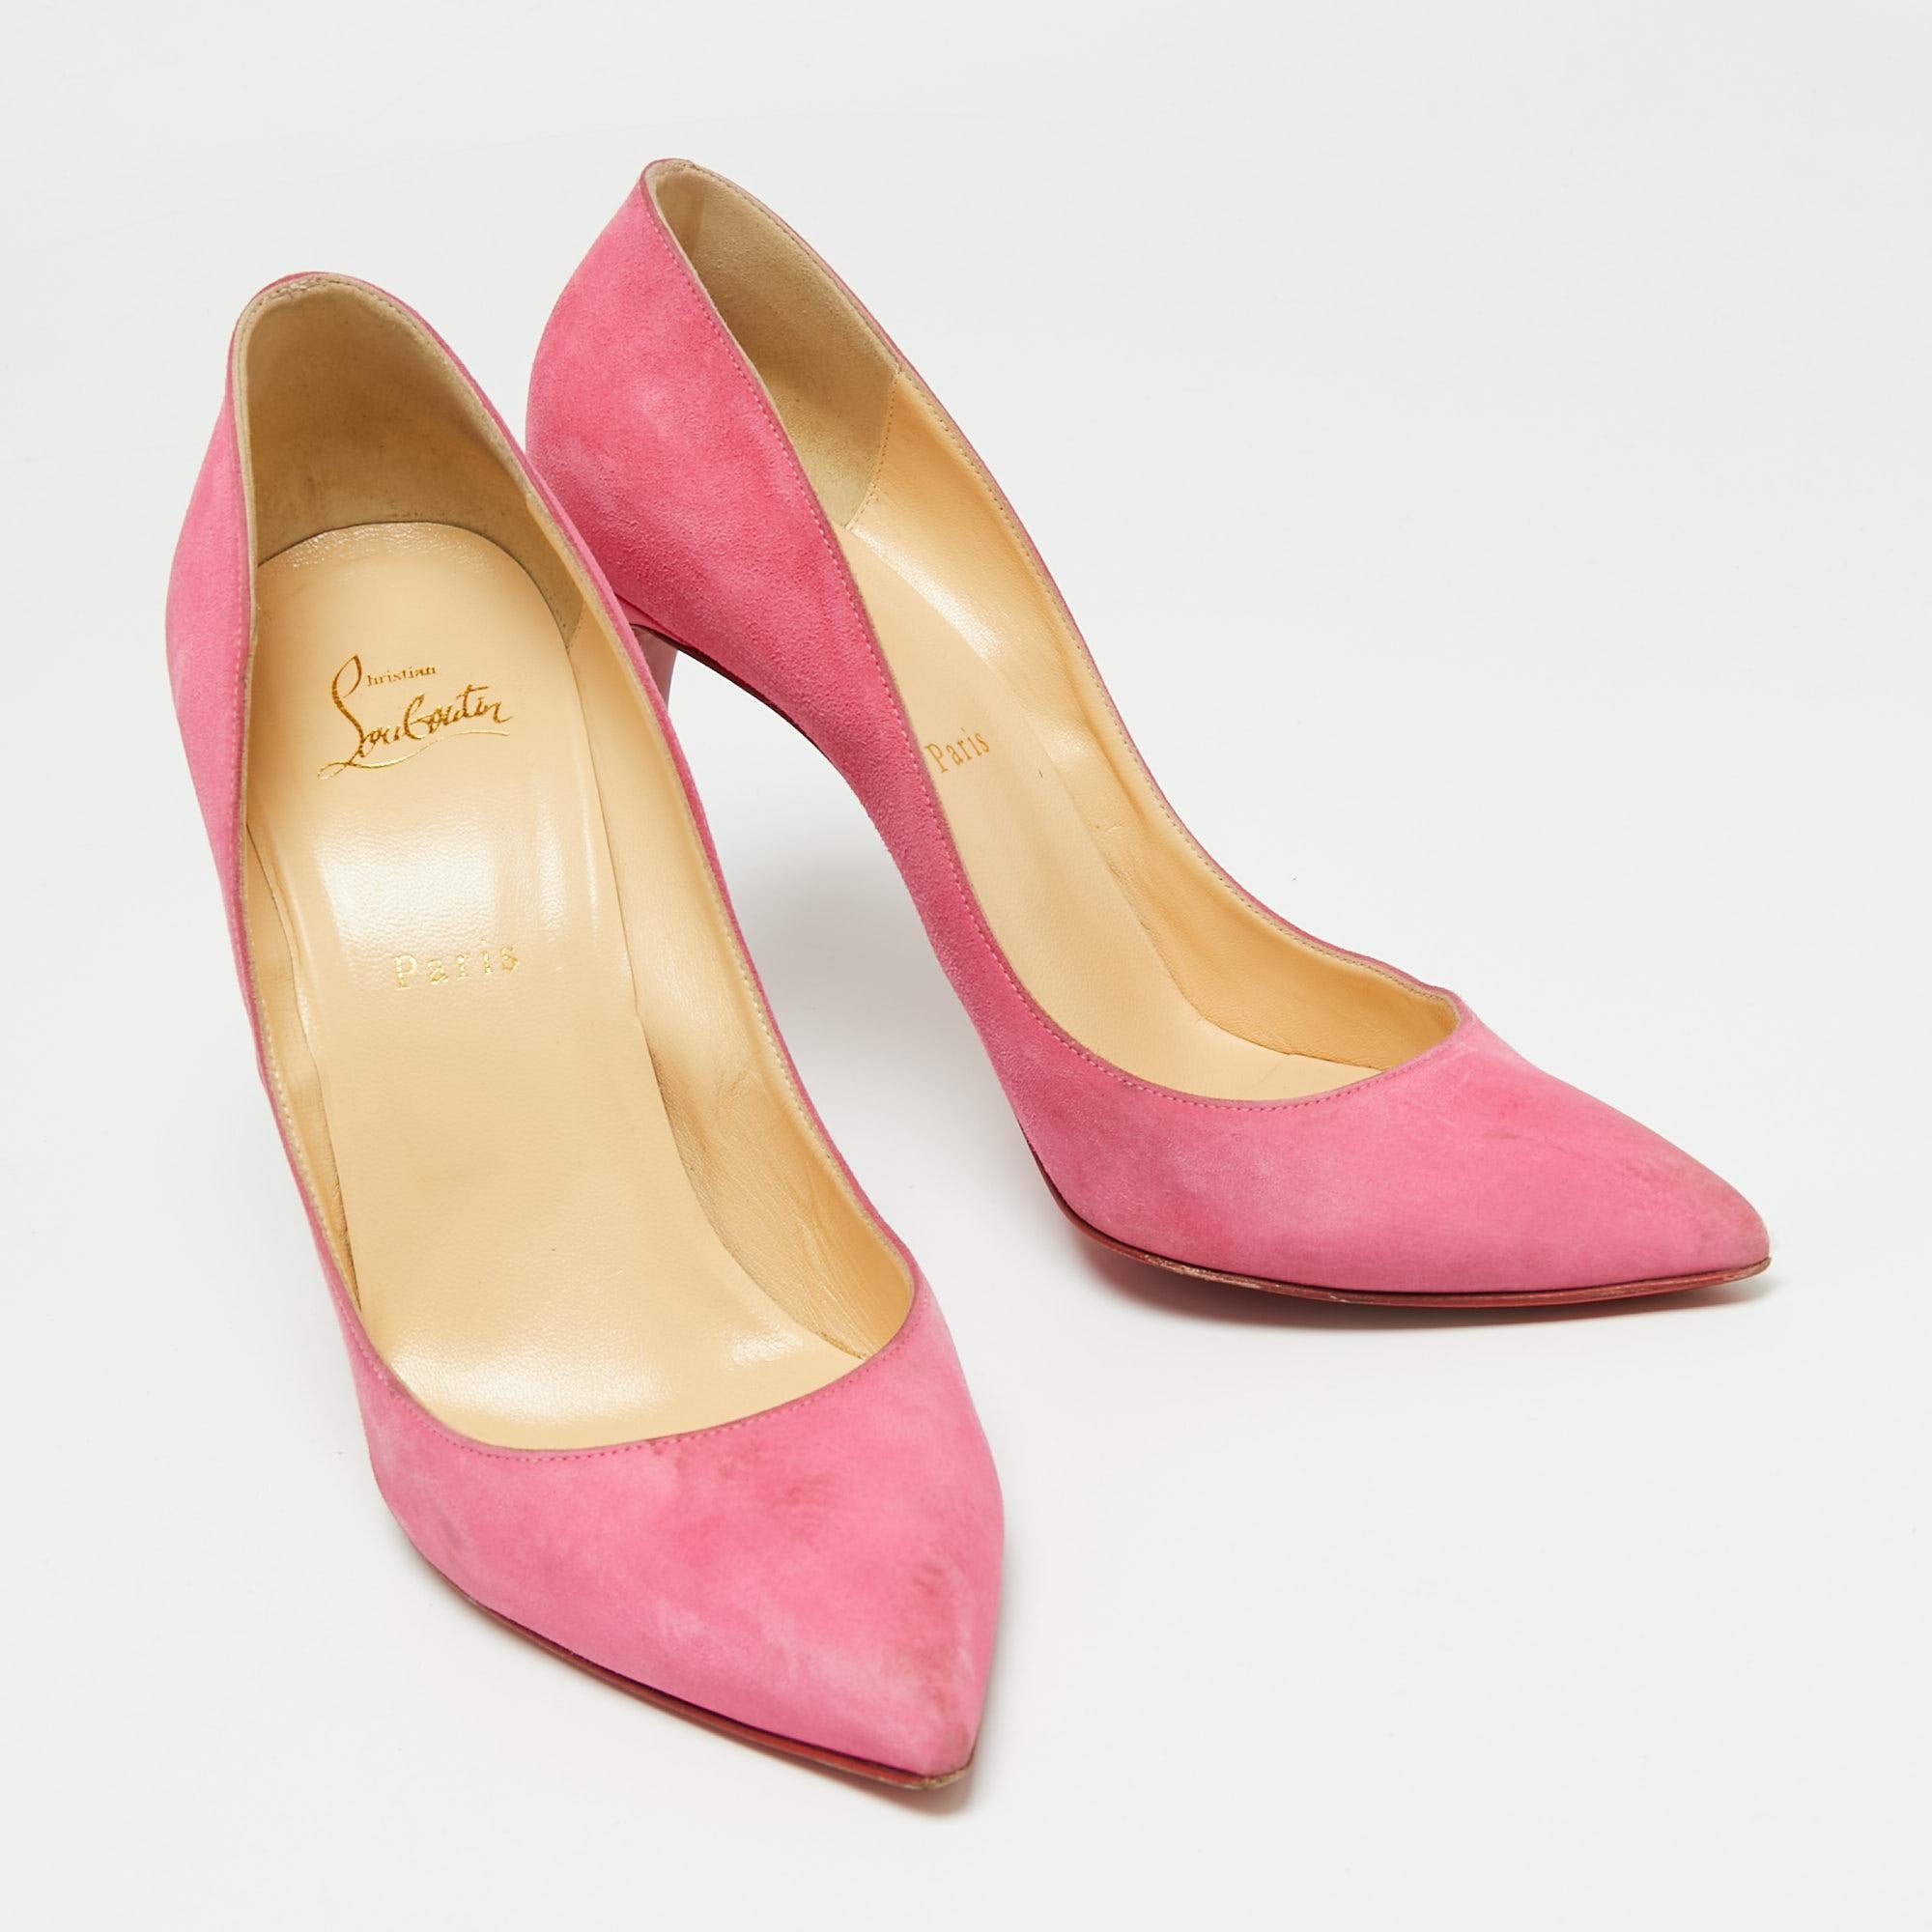 Christian Louboutin Pink Suede Pigalle Follies Pumps Size 41.5 3